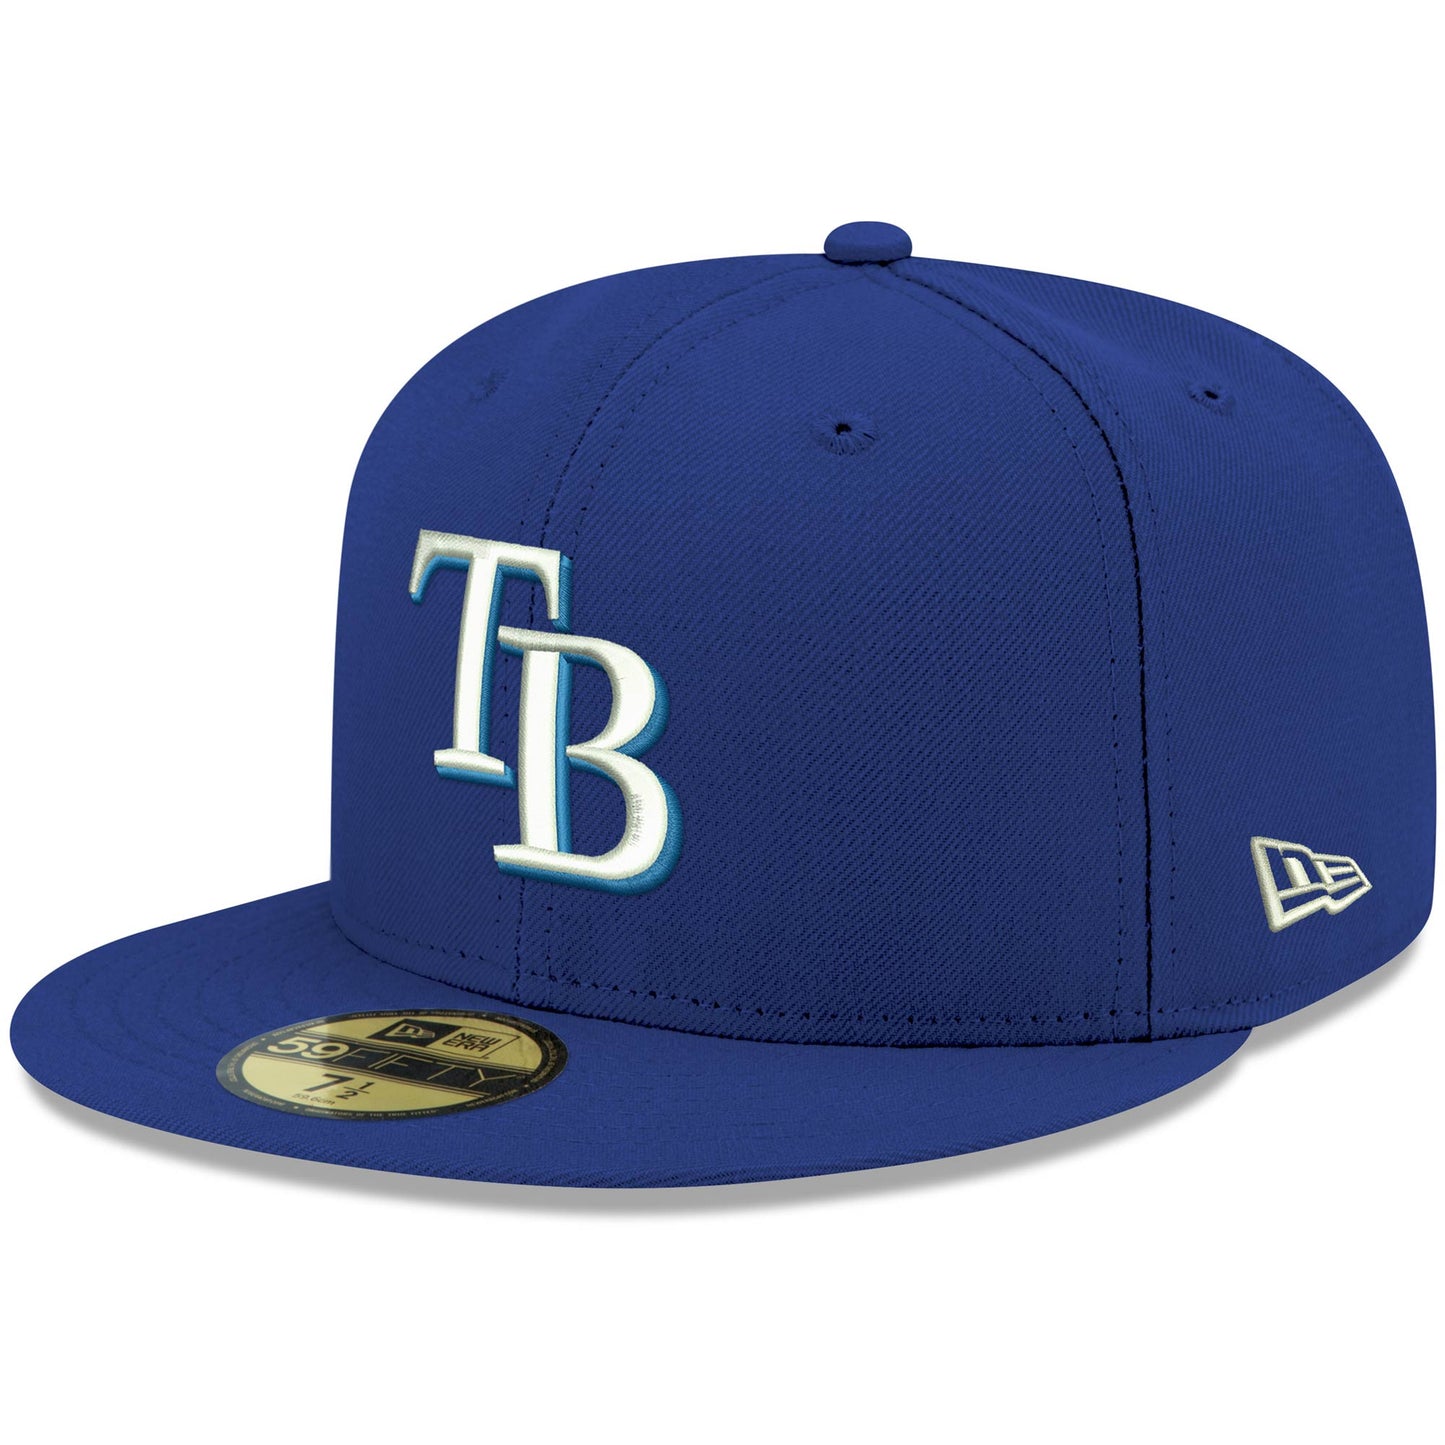 Tampa Bay Rays New Era White Logo 59FIFTY Fitted Hat - Royal